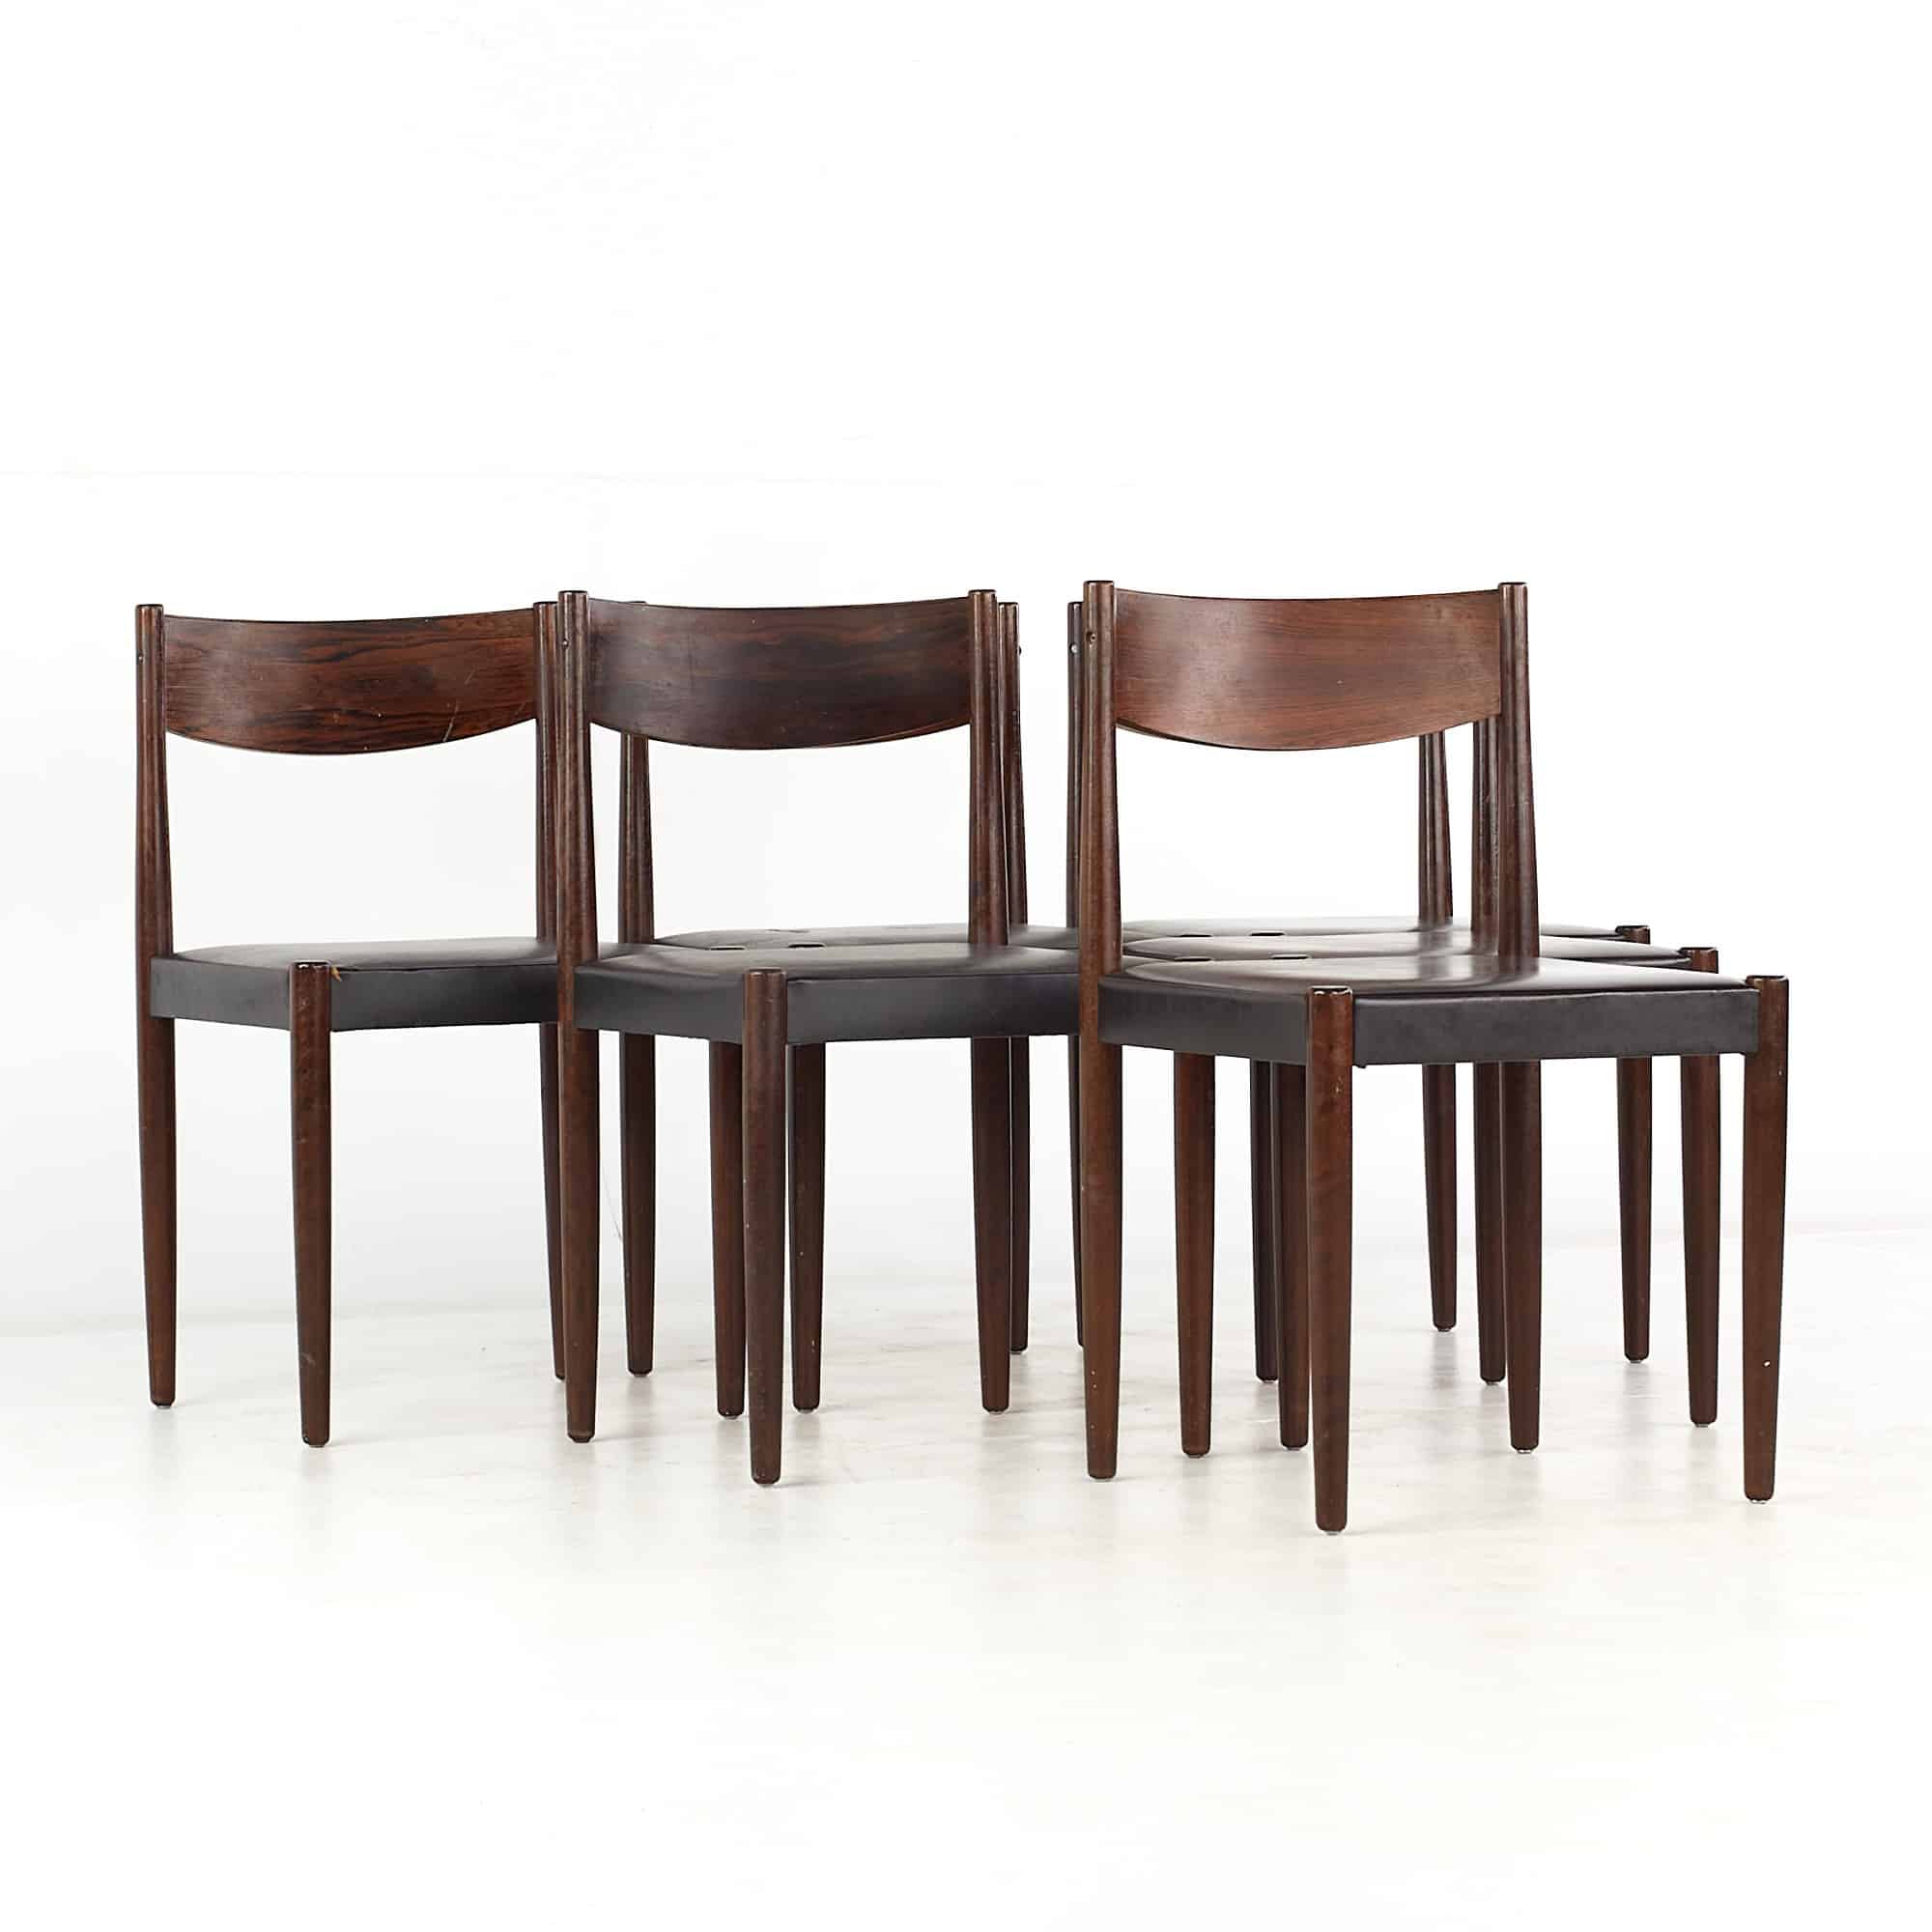 Niels Moller Style Mid Century Danish Rosewood Dining Chairs - Set of 6